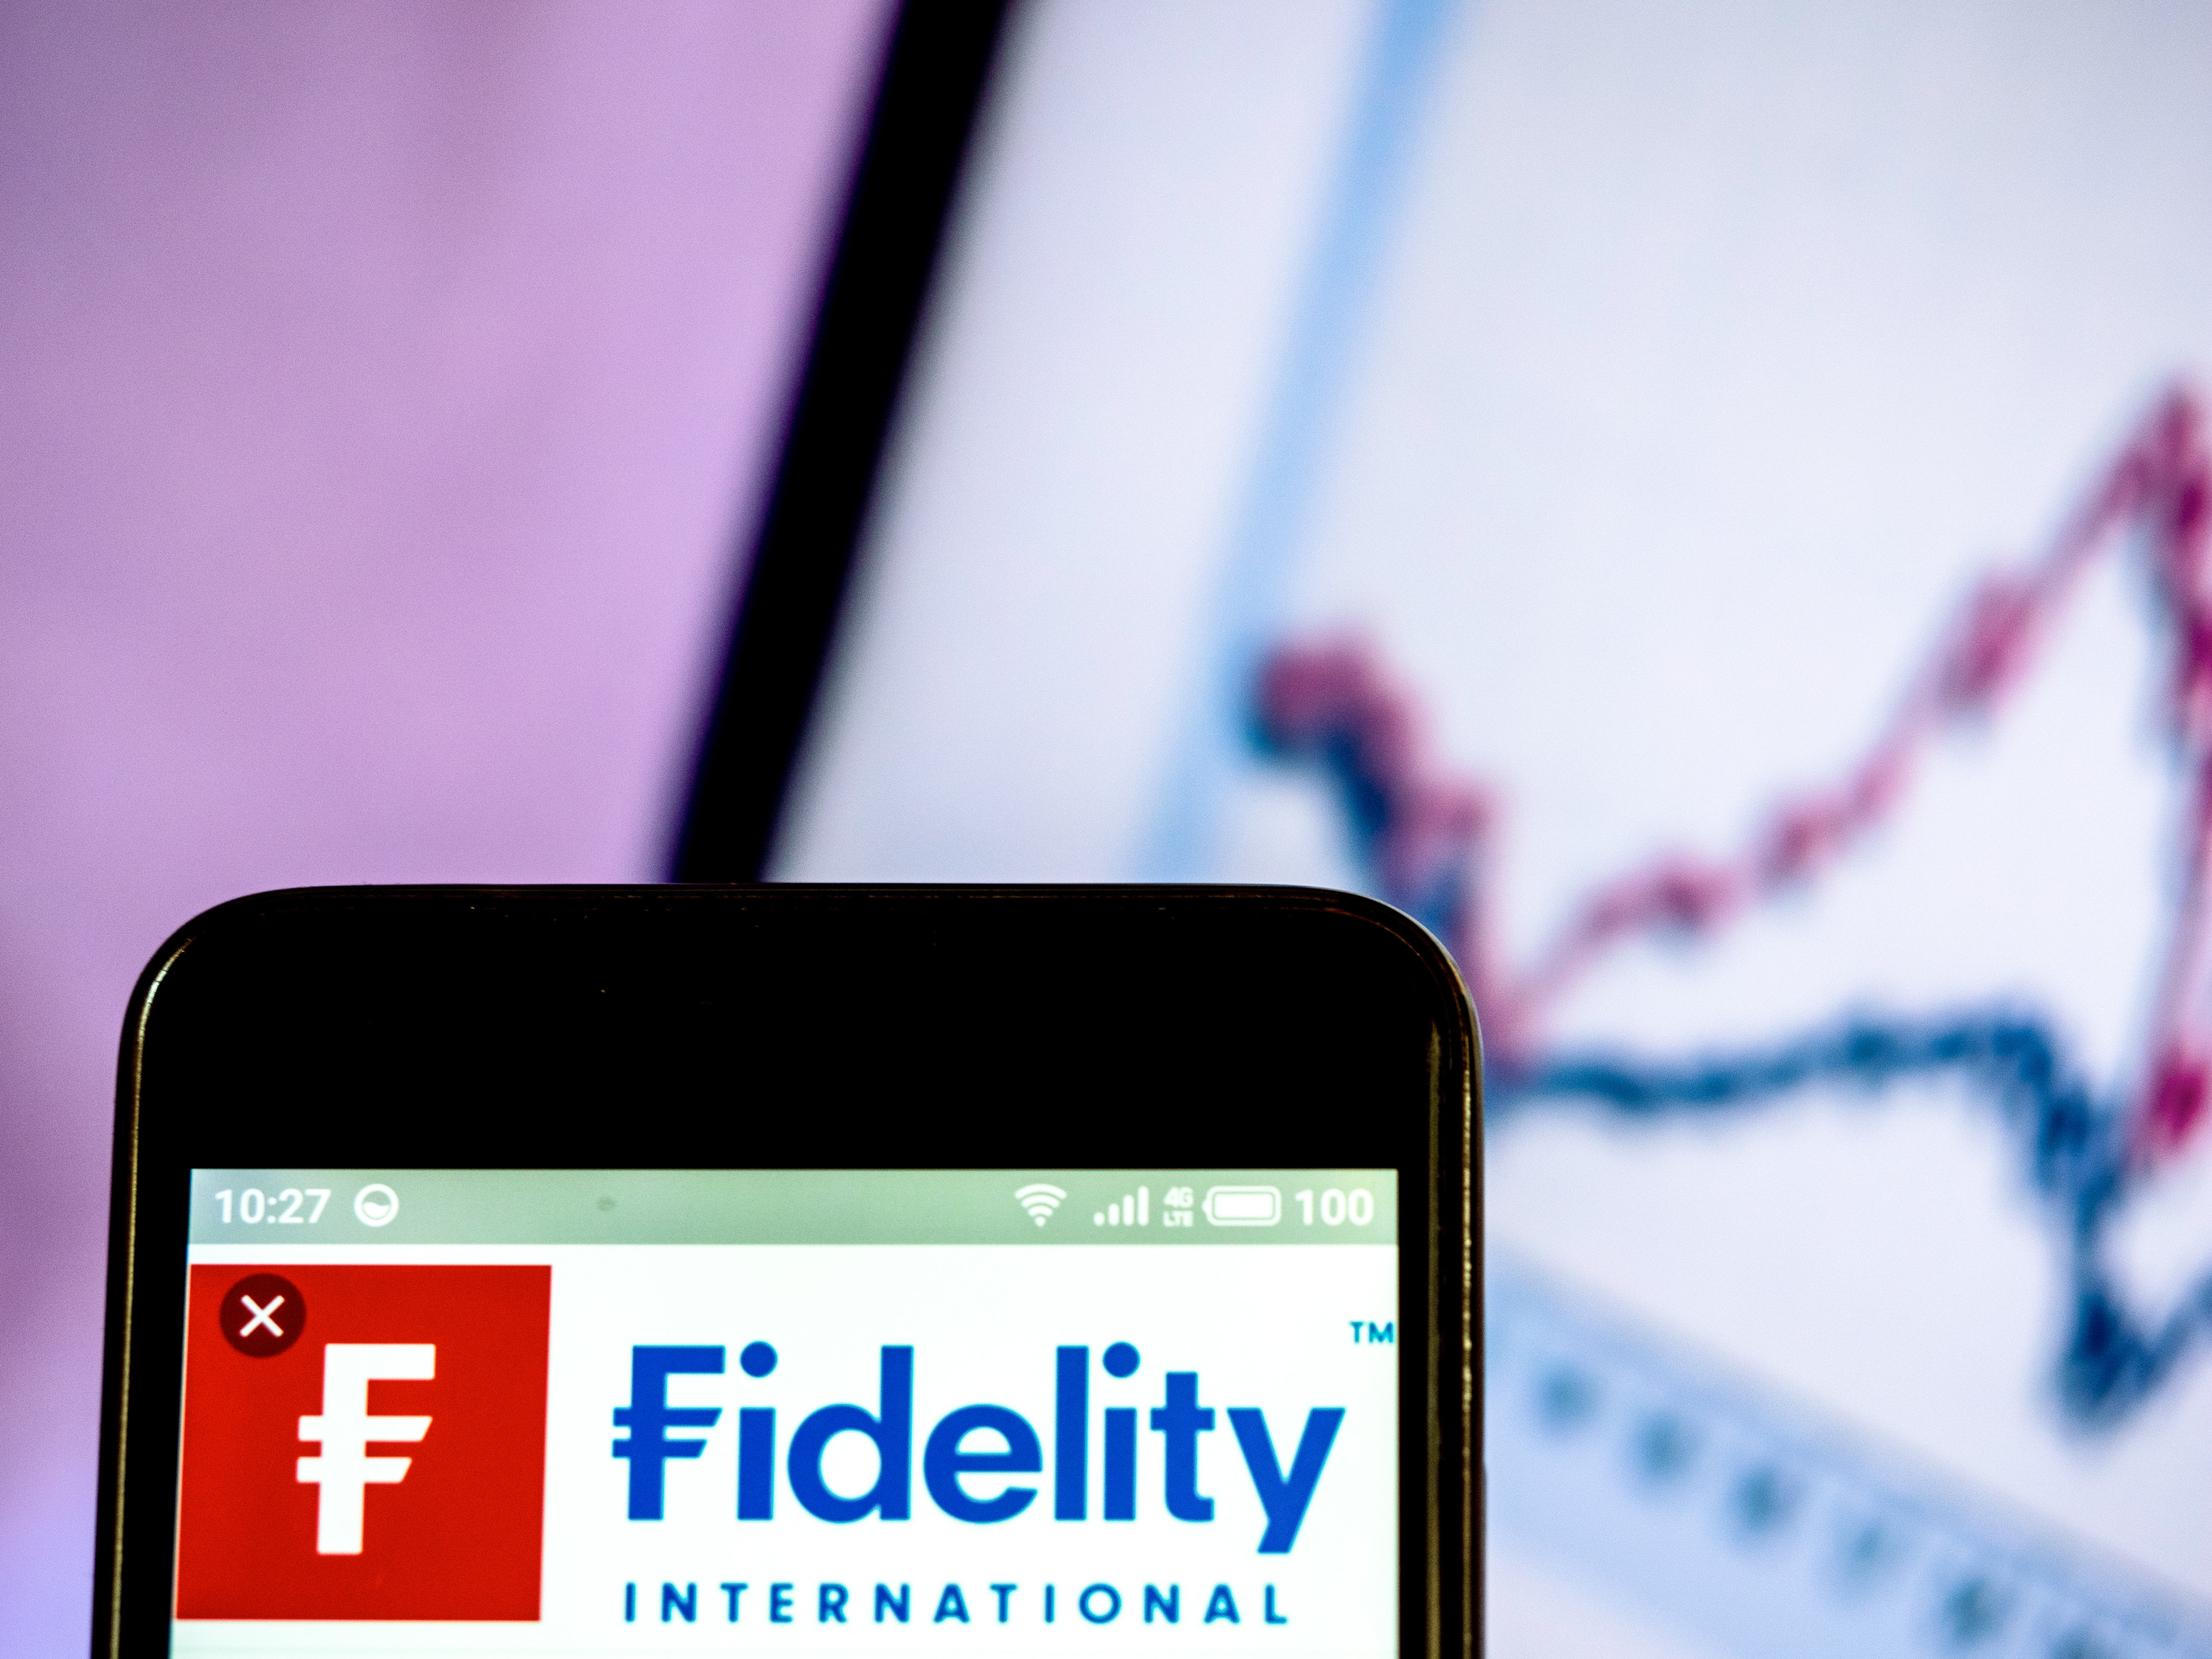 Fidelity received permission from China to tap the nation’s US$3.7 trillion mutual-fund market through its wholly owned entity in December. Photo: Shutterstock